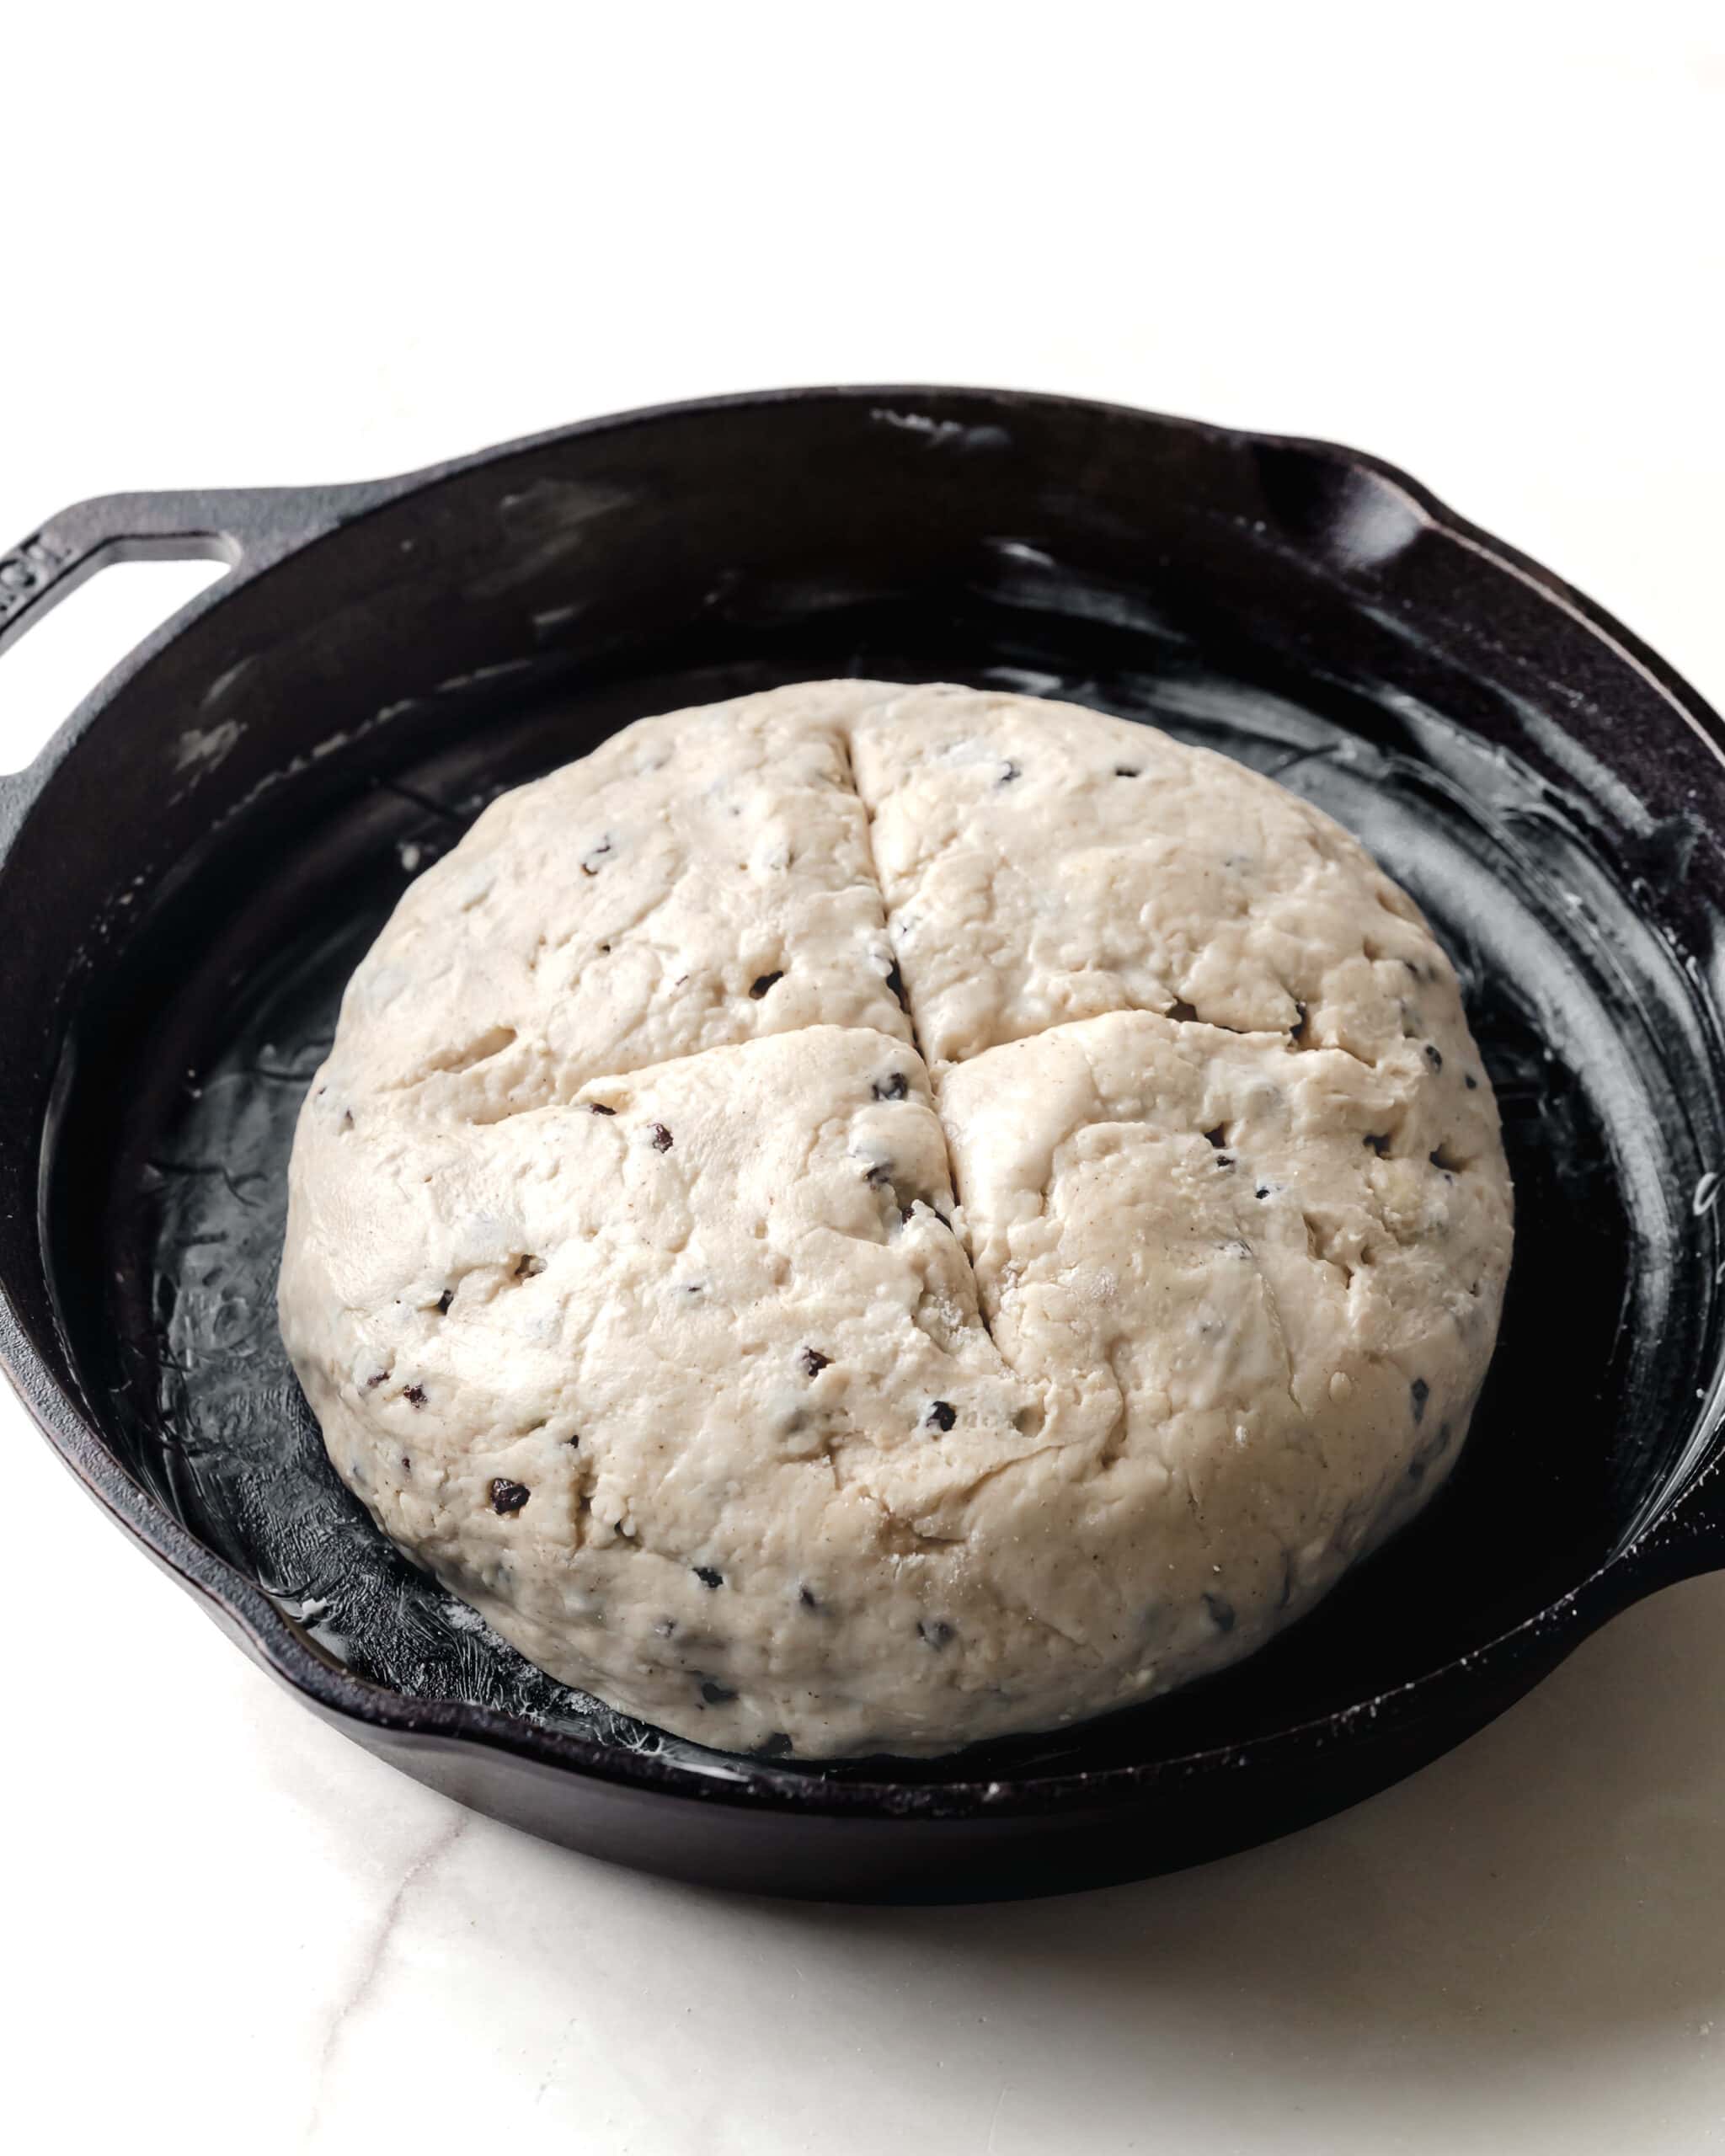 A round mound of soda bread in a greased cast iron skillet.